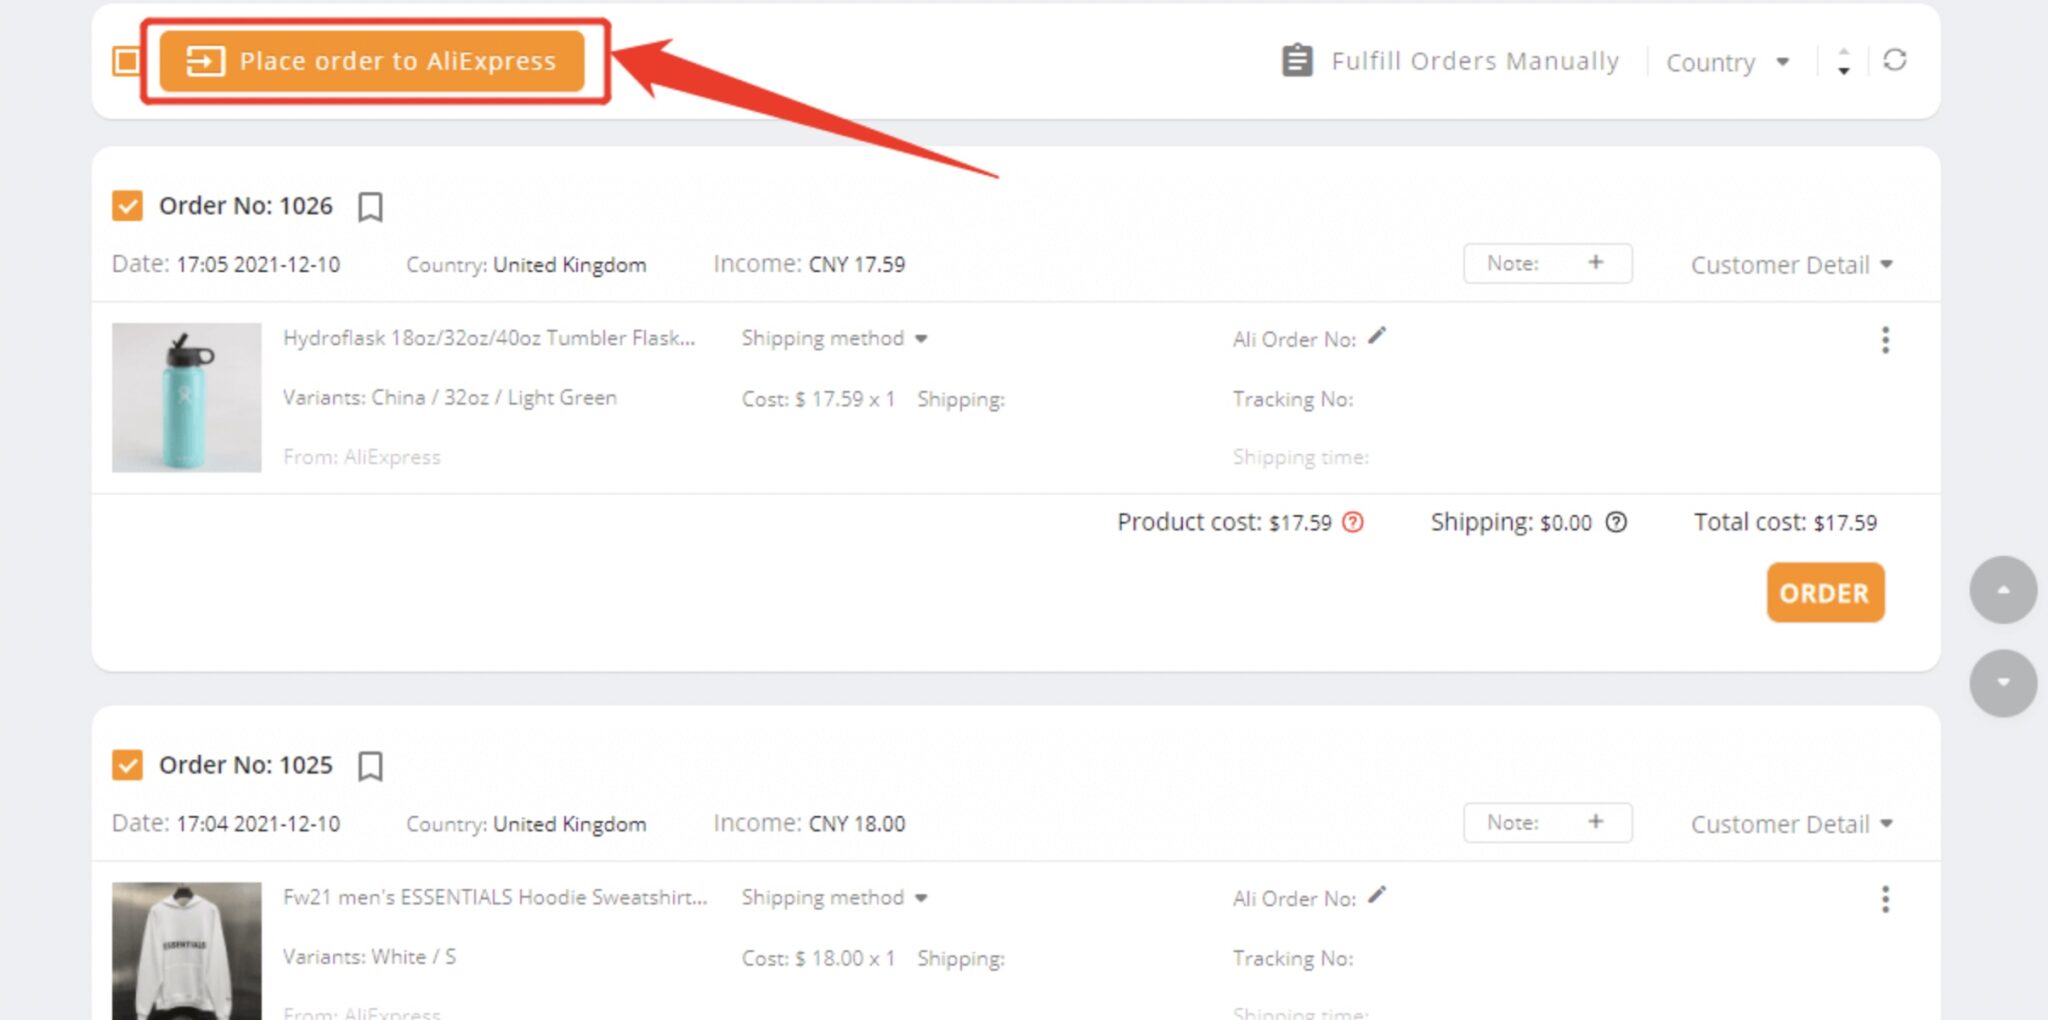 Check the box next to the orders you want to place, then click 'Place order to AliExpress.'